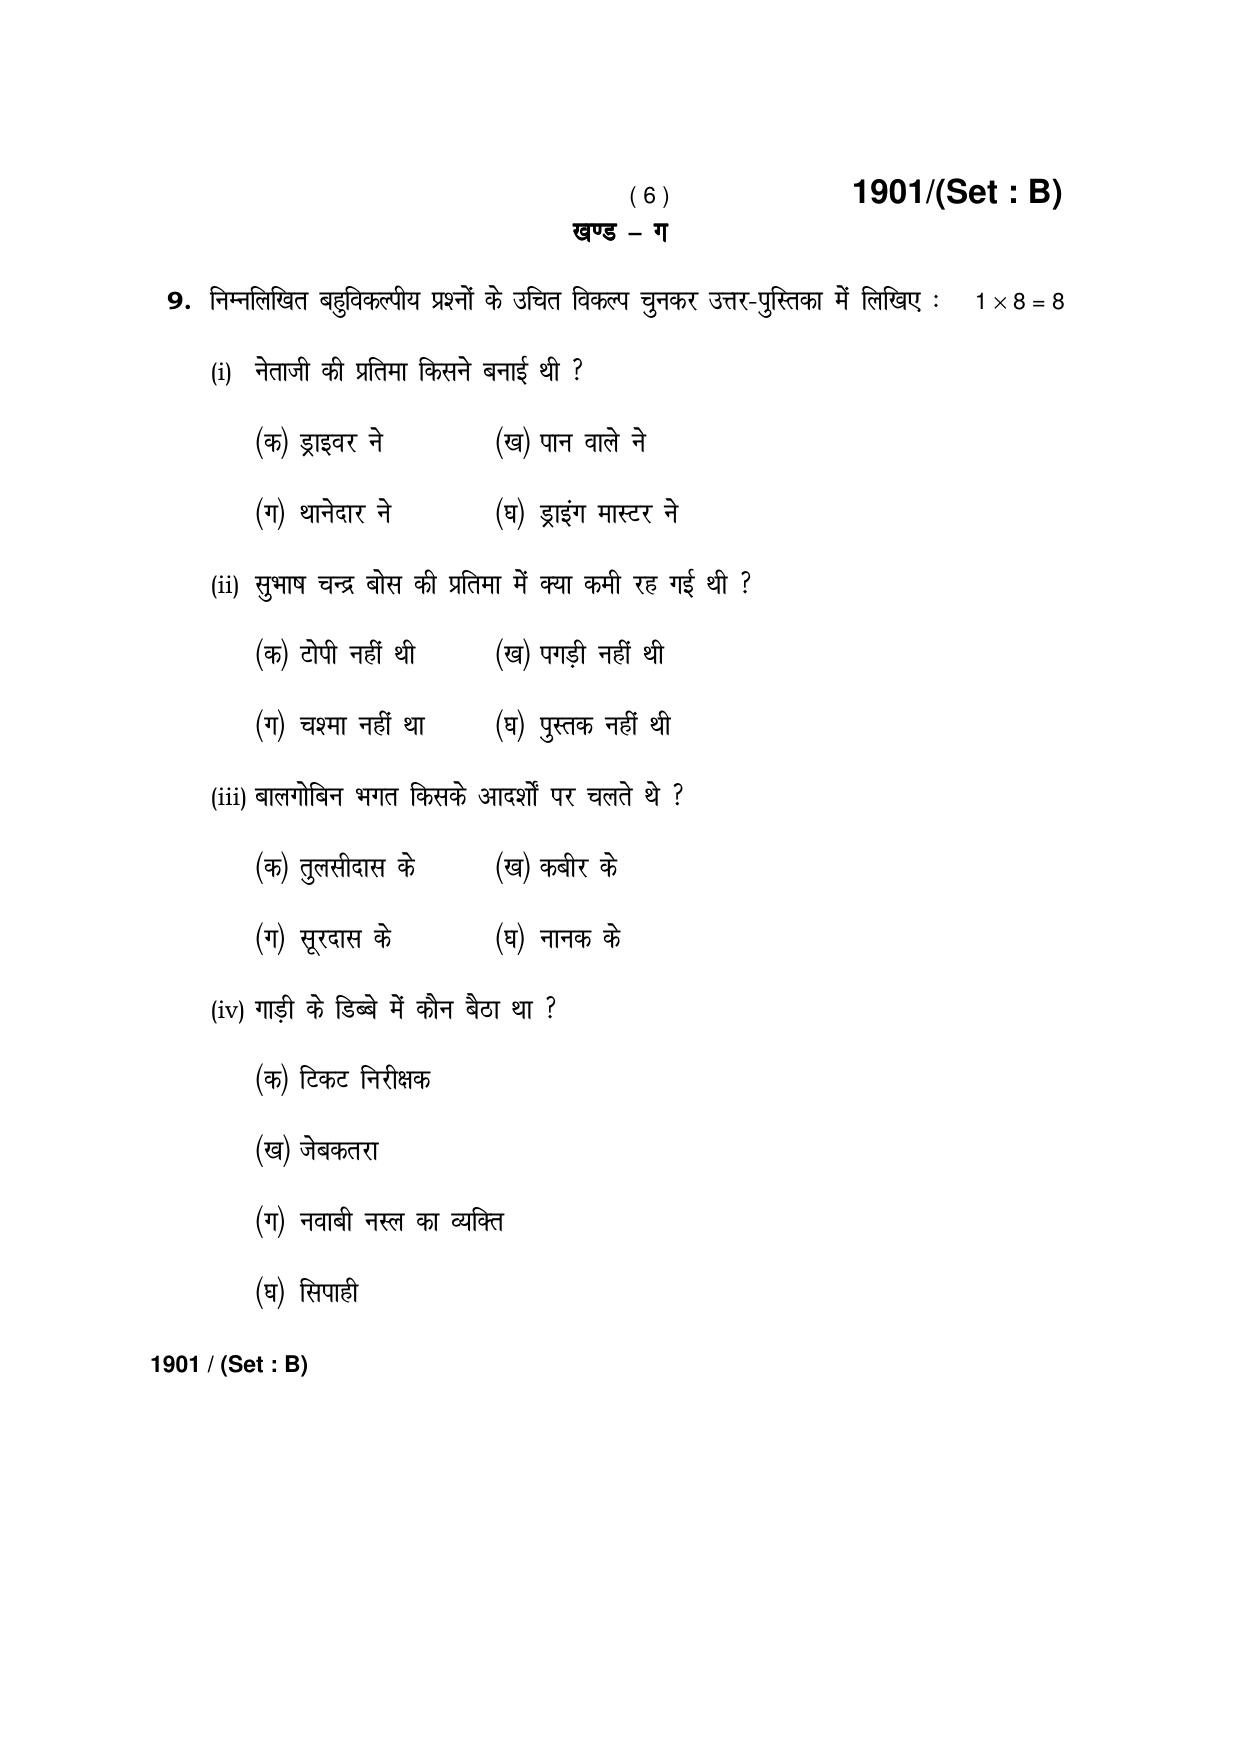 Haryana Board HBSE Class 10 Hindi -B 2017 Question Paper - Page 6